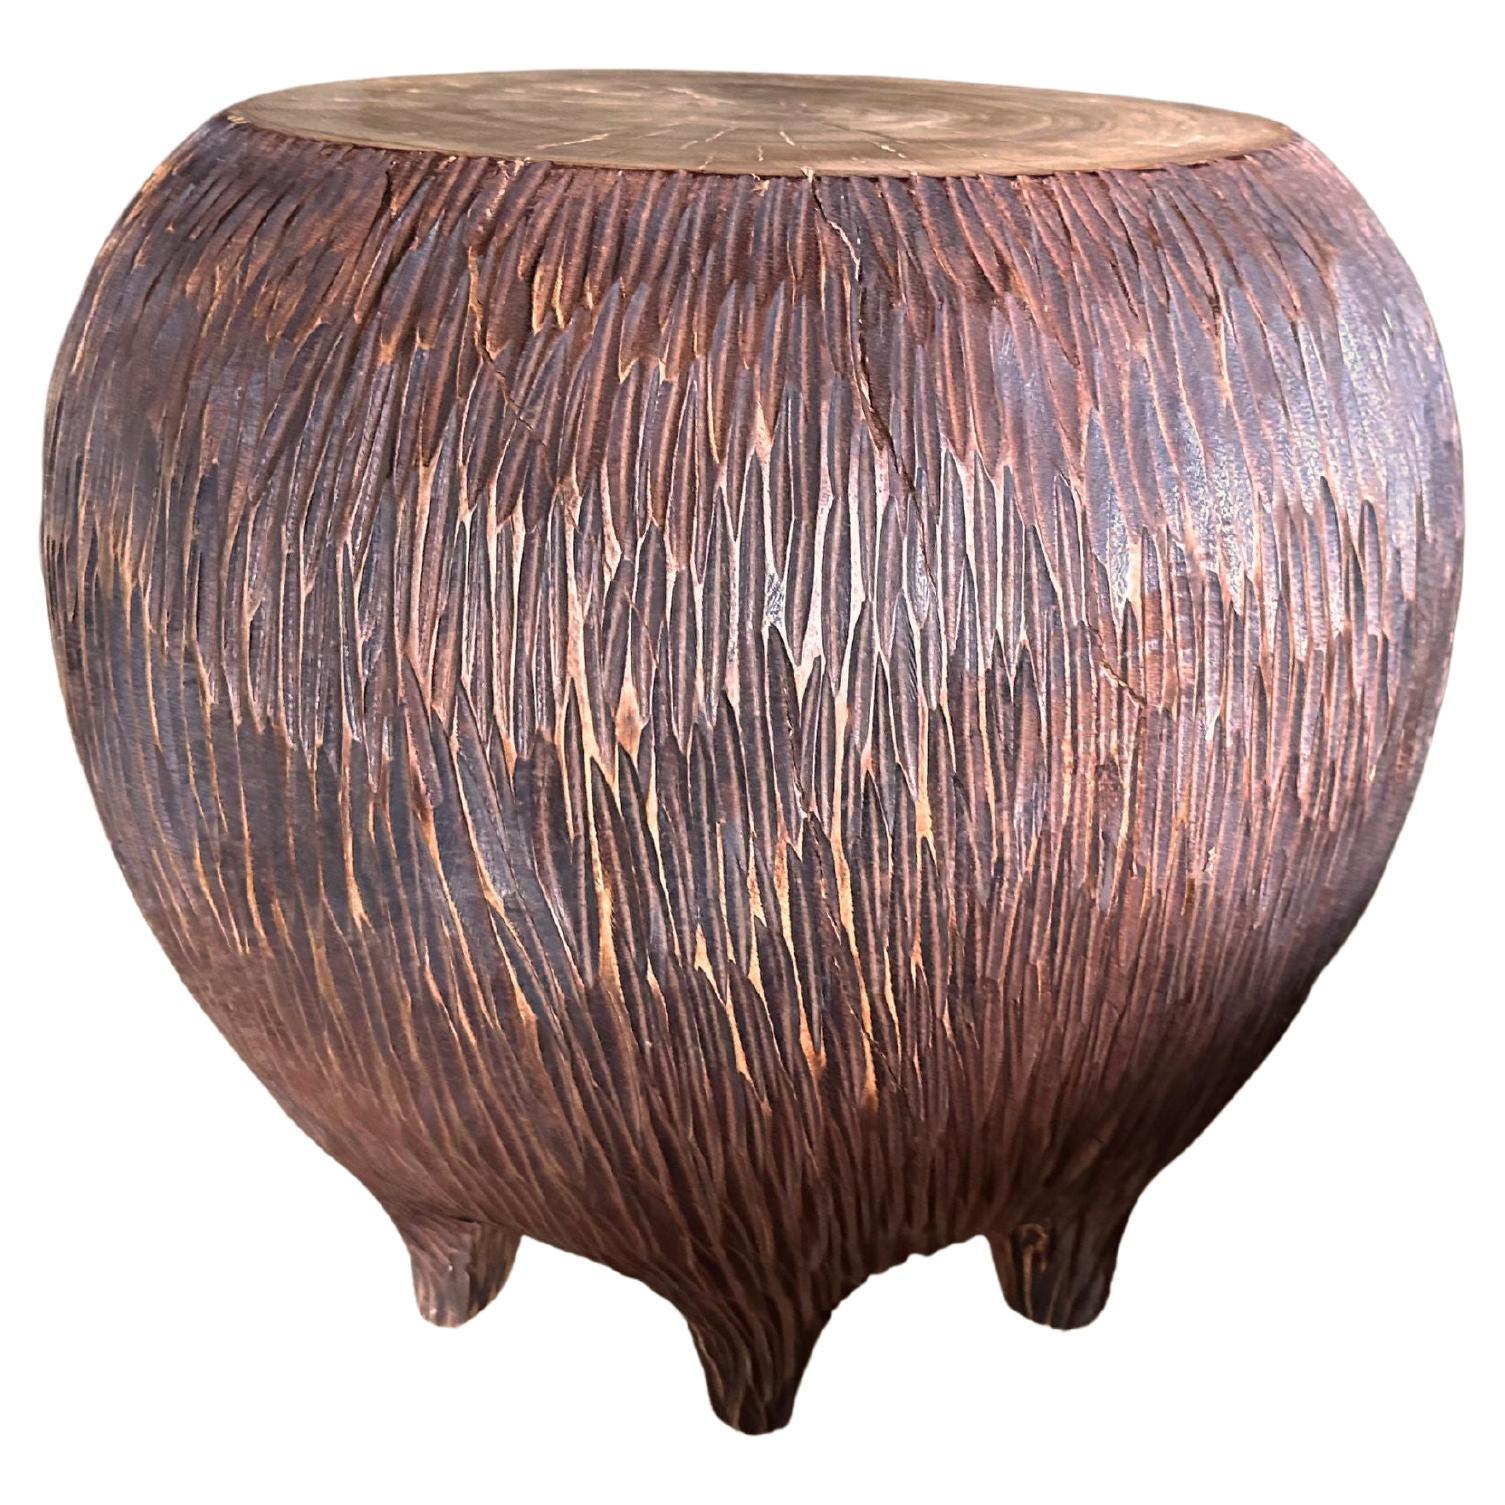 Sculptural Side Table Solid Mango Wood, Hand-Hewn Detailing, Modern Organic For Sale